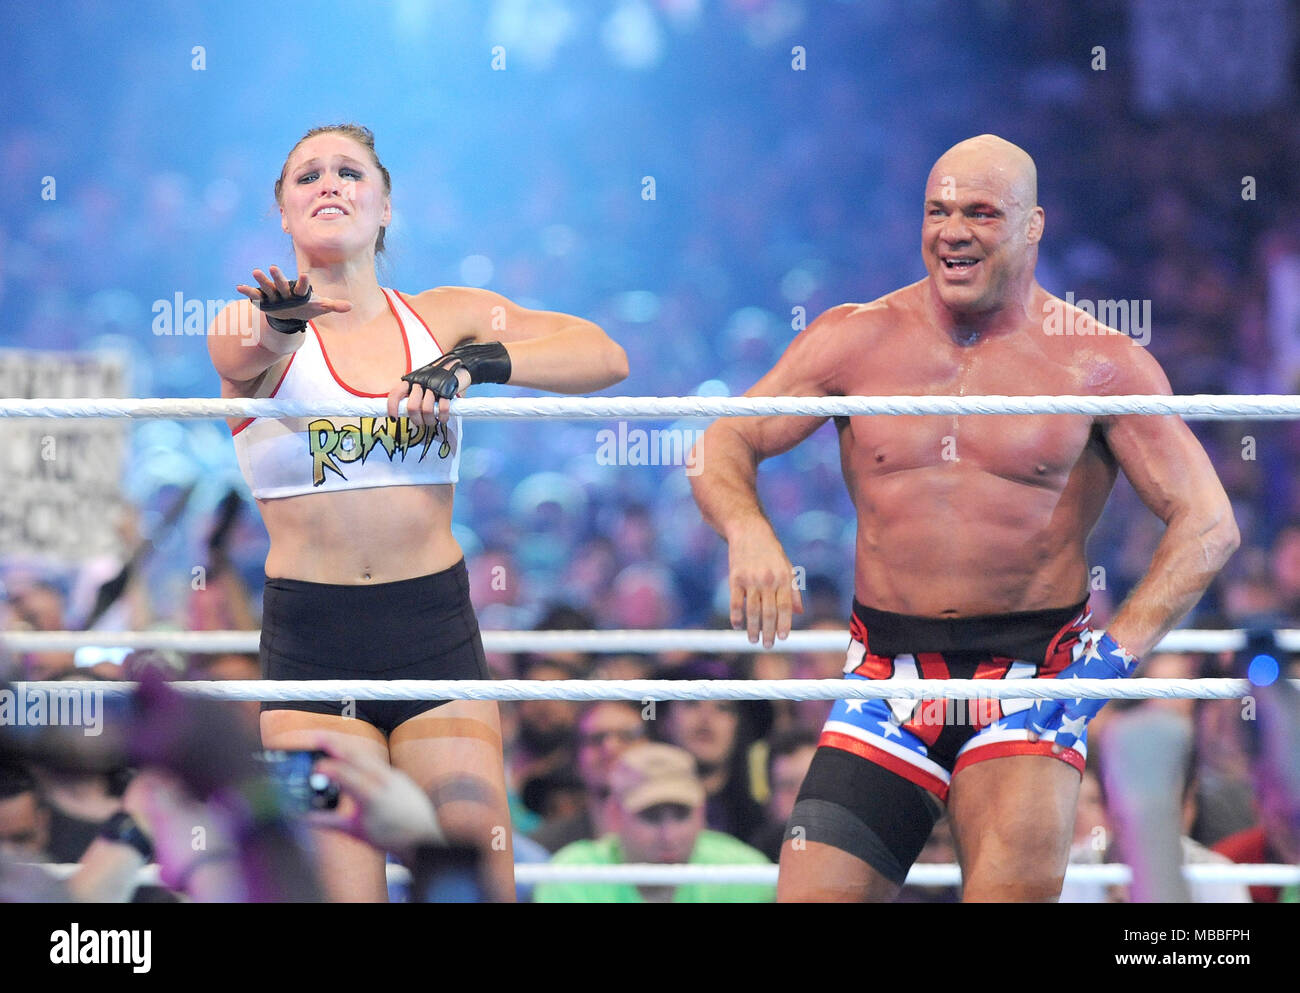 New Orleans, LA, USA. 8th Apr, 2018. Ronda Rousey and Kurt Angle at WWE Wrestlemania 34 at the Mercedes-Benz Superdome in New Orleans, Louisiana on April 8, 2018. Credit: George Napolitano/Media Punch/Alamy Live News Stock Photo